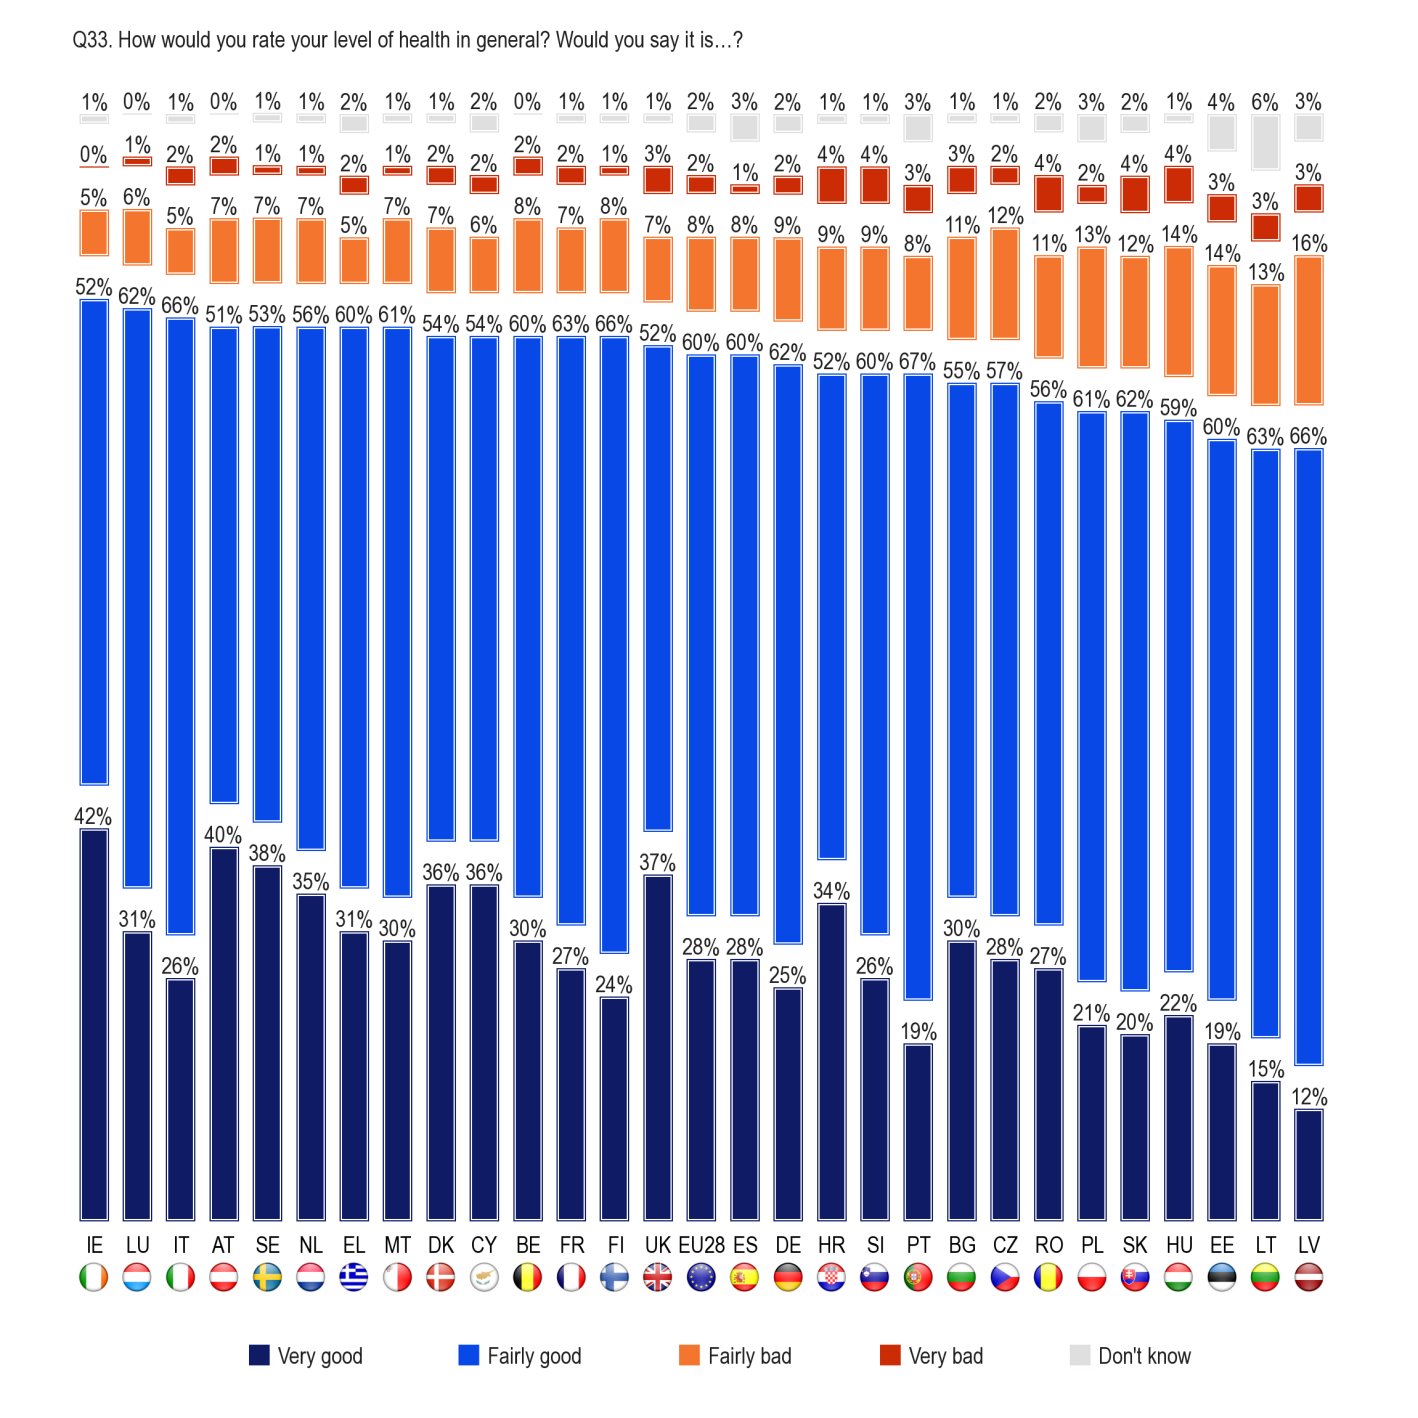 FLASH EUROBAROMETER In 13 Member States, at least 90% of people consider their level of health in general as good.